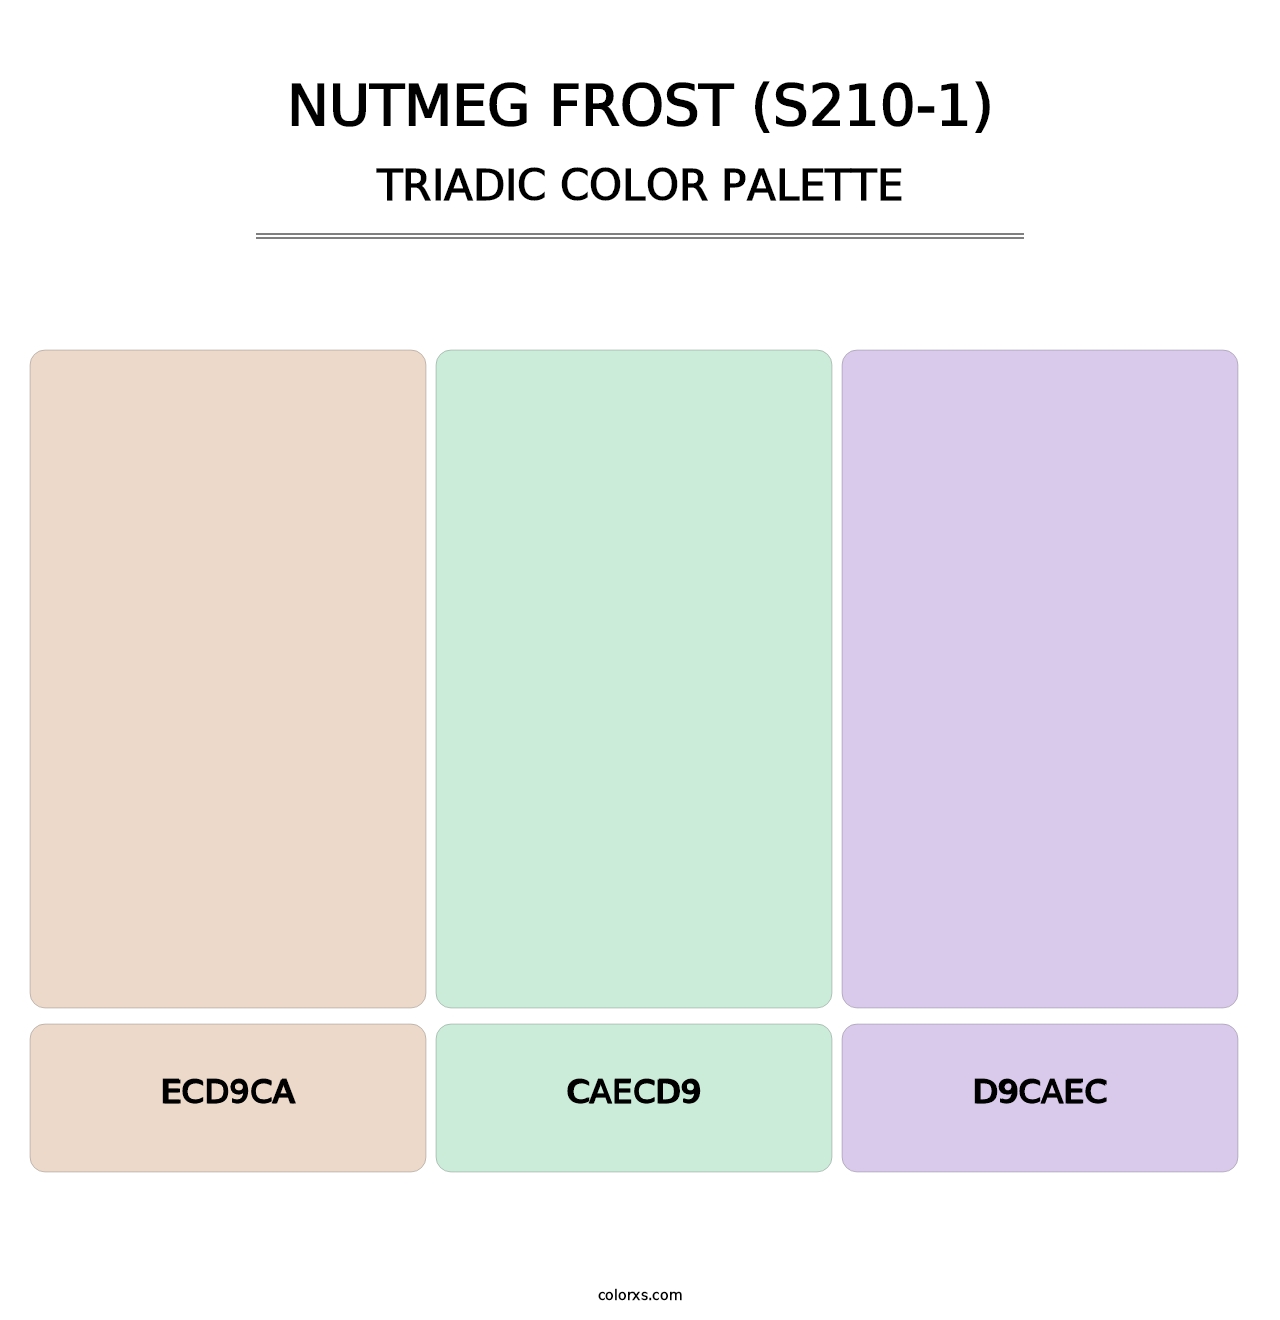 Nutmeg Frost (S210-1) - Triadic Color Palette